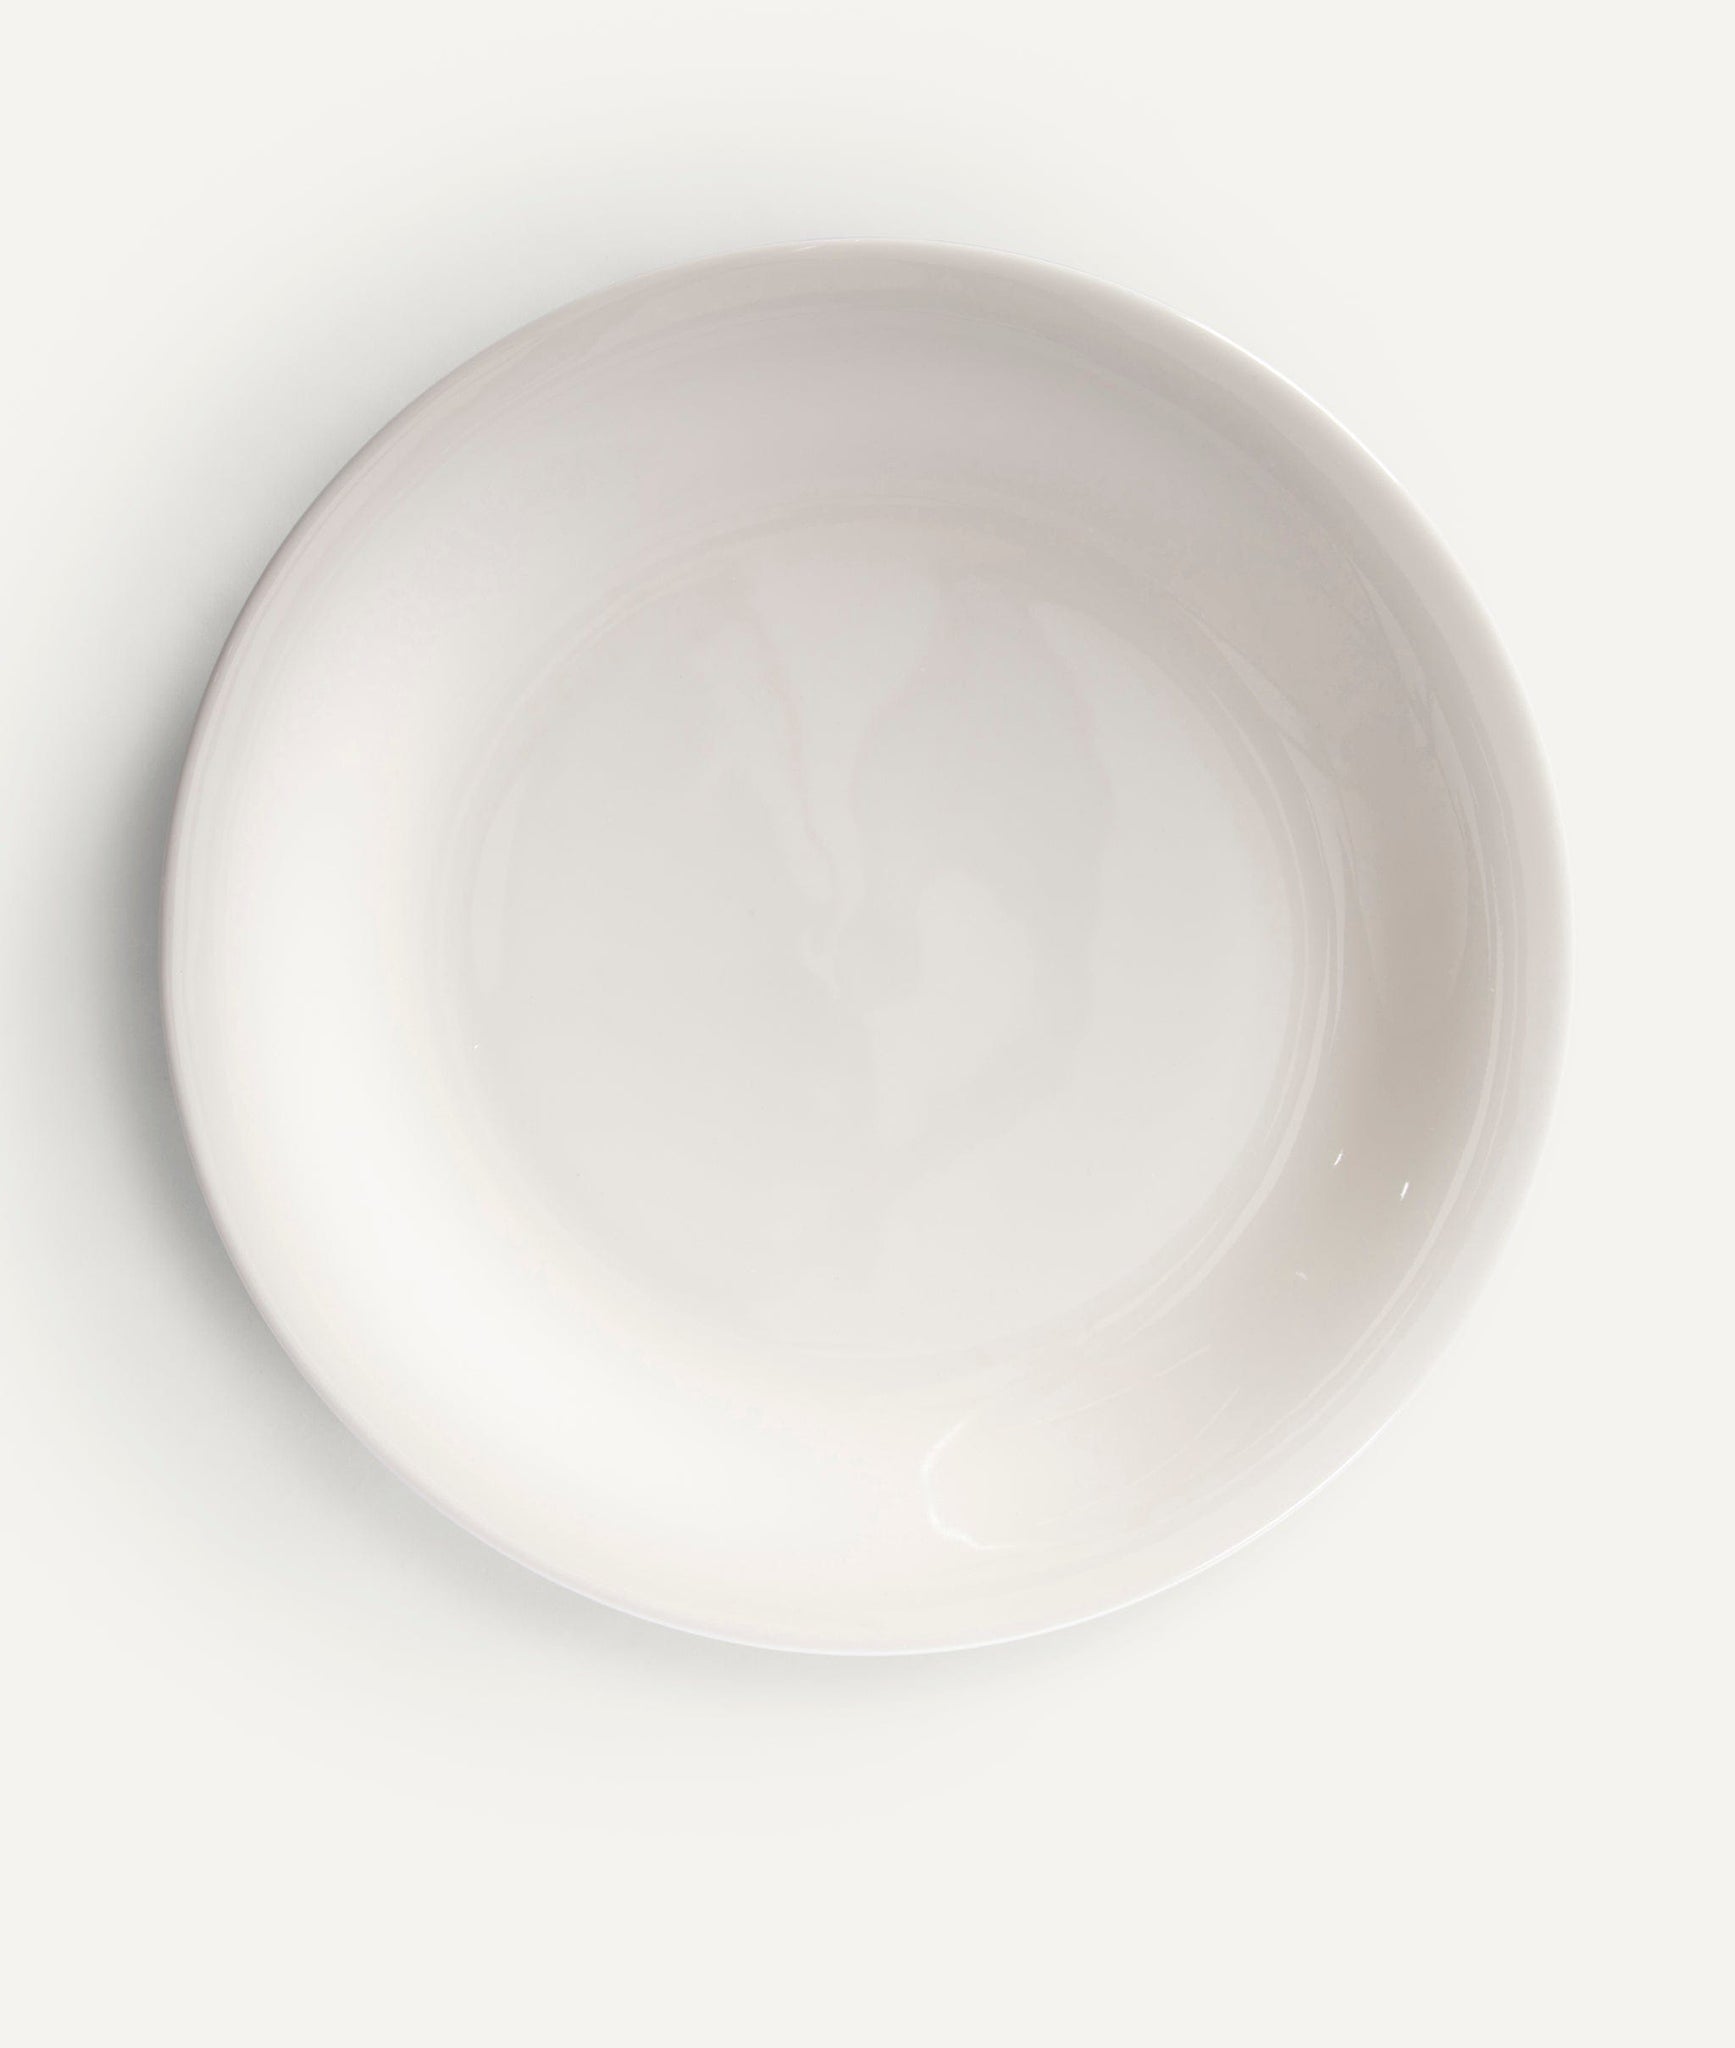 Plate Set "Drop" in Finebone China - 4 Pieces